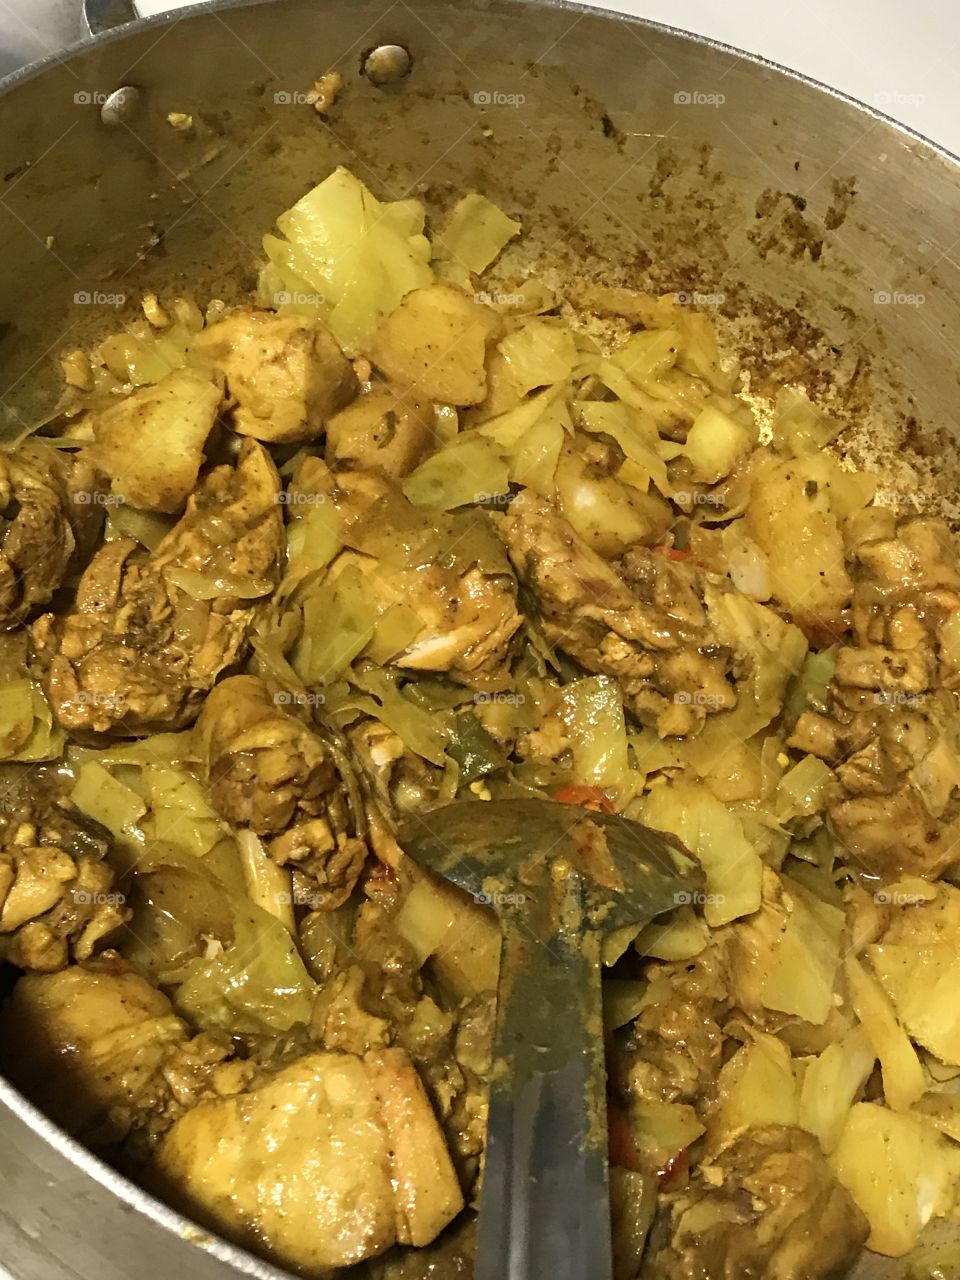 Curry chicken with cabbage 